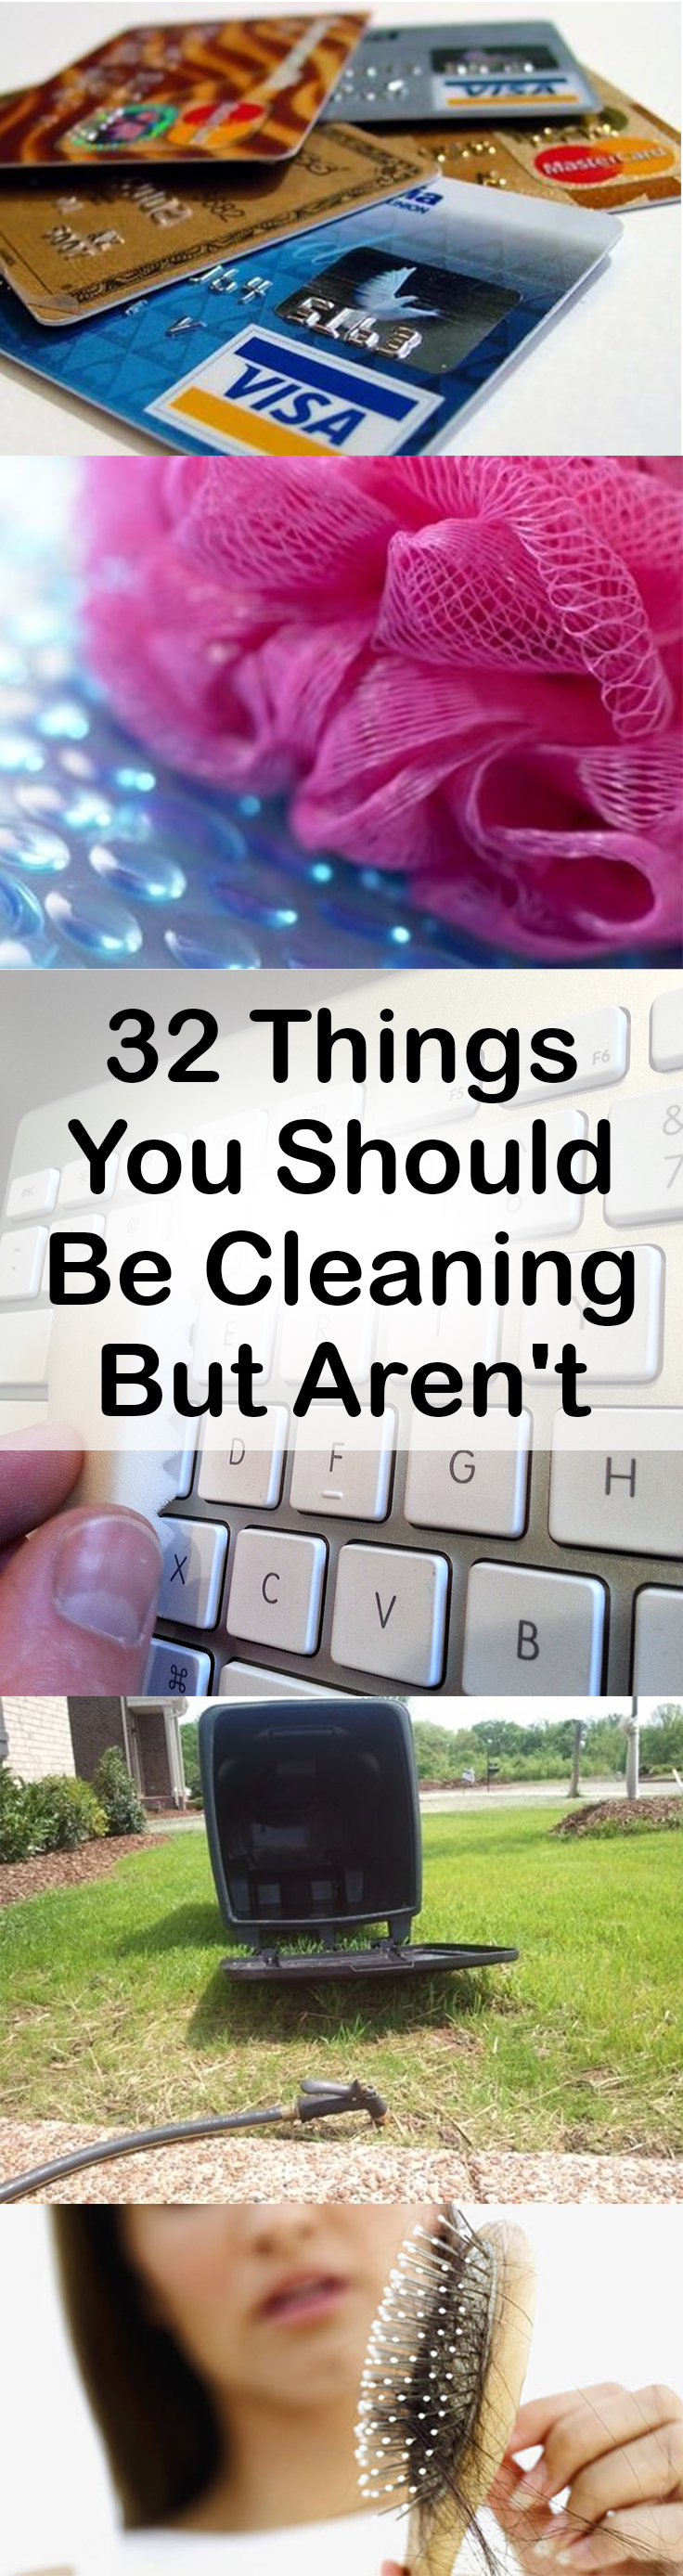 Cleaning, things to clean, cleaning hacks, popular pin, cleaning tips and tricks, cleaning ideas, DIY clean, DIY cleaning, easy cleaning ideas